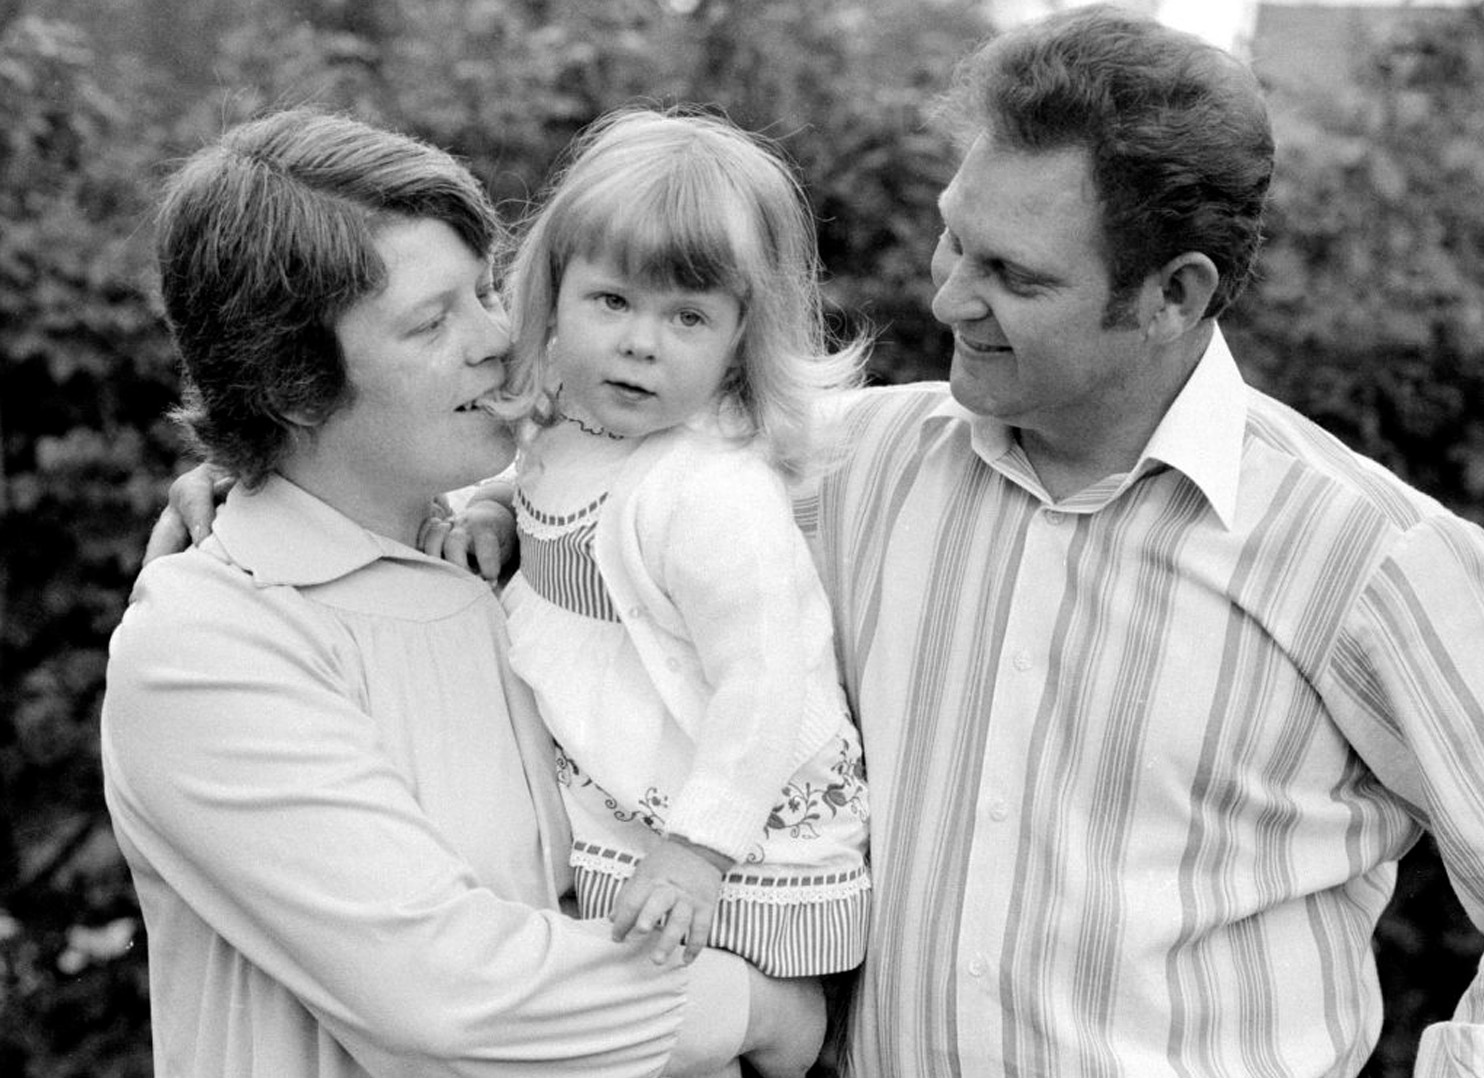 Louise Brown - Test Tube Baby - May 1980 Parents Leslie and John Brown at home in Bristol